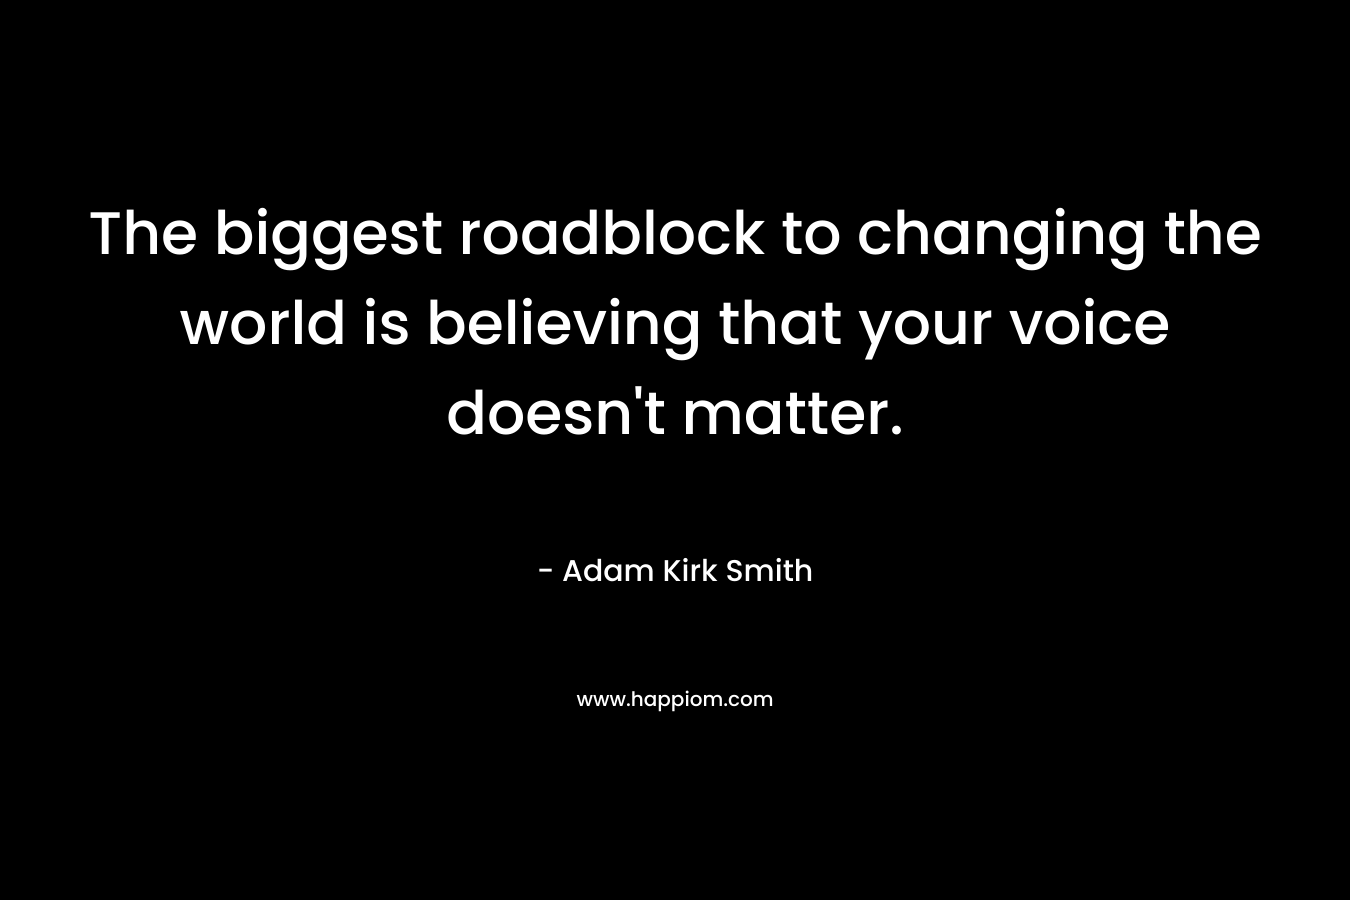 The biggest roadblock to changing the world is believing that your voice doesn’t matter. – Adam Kirk Smith